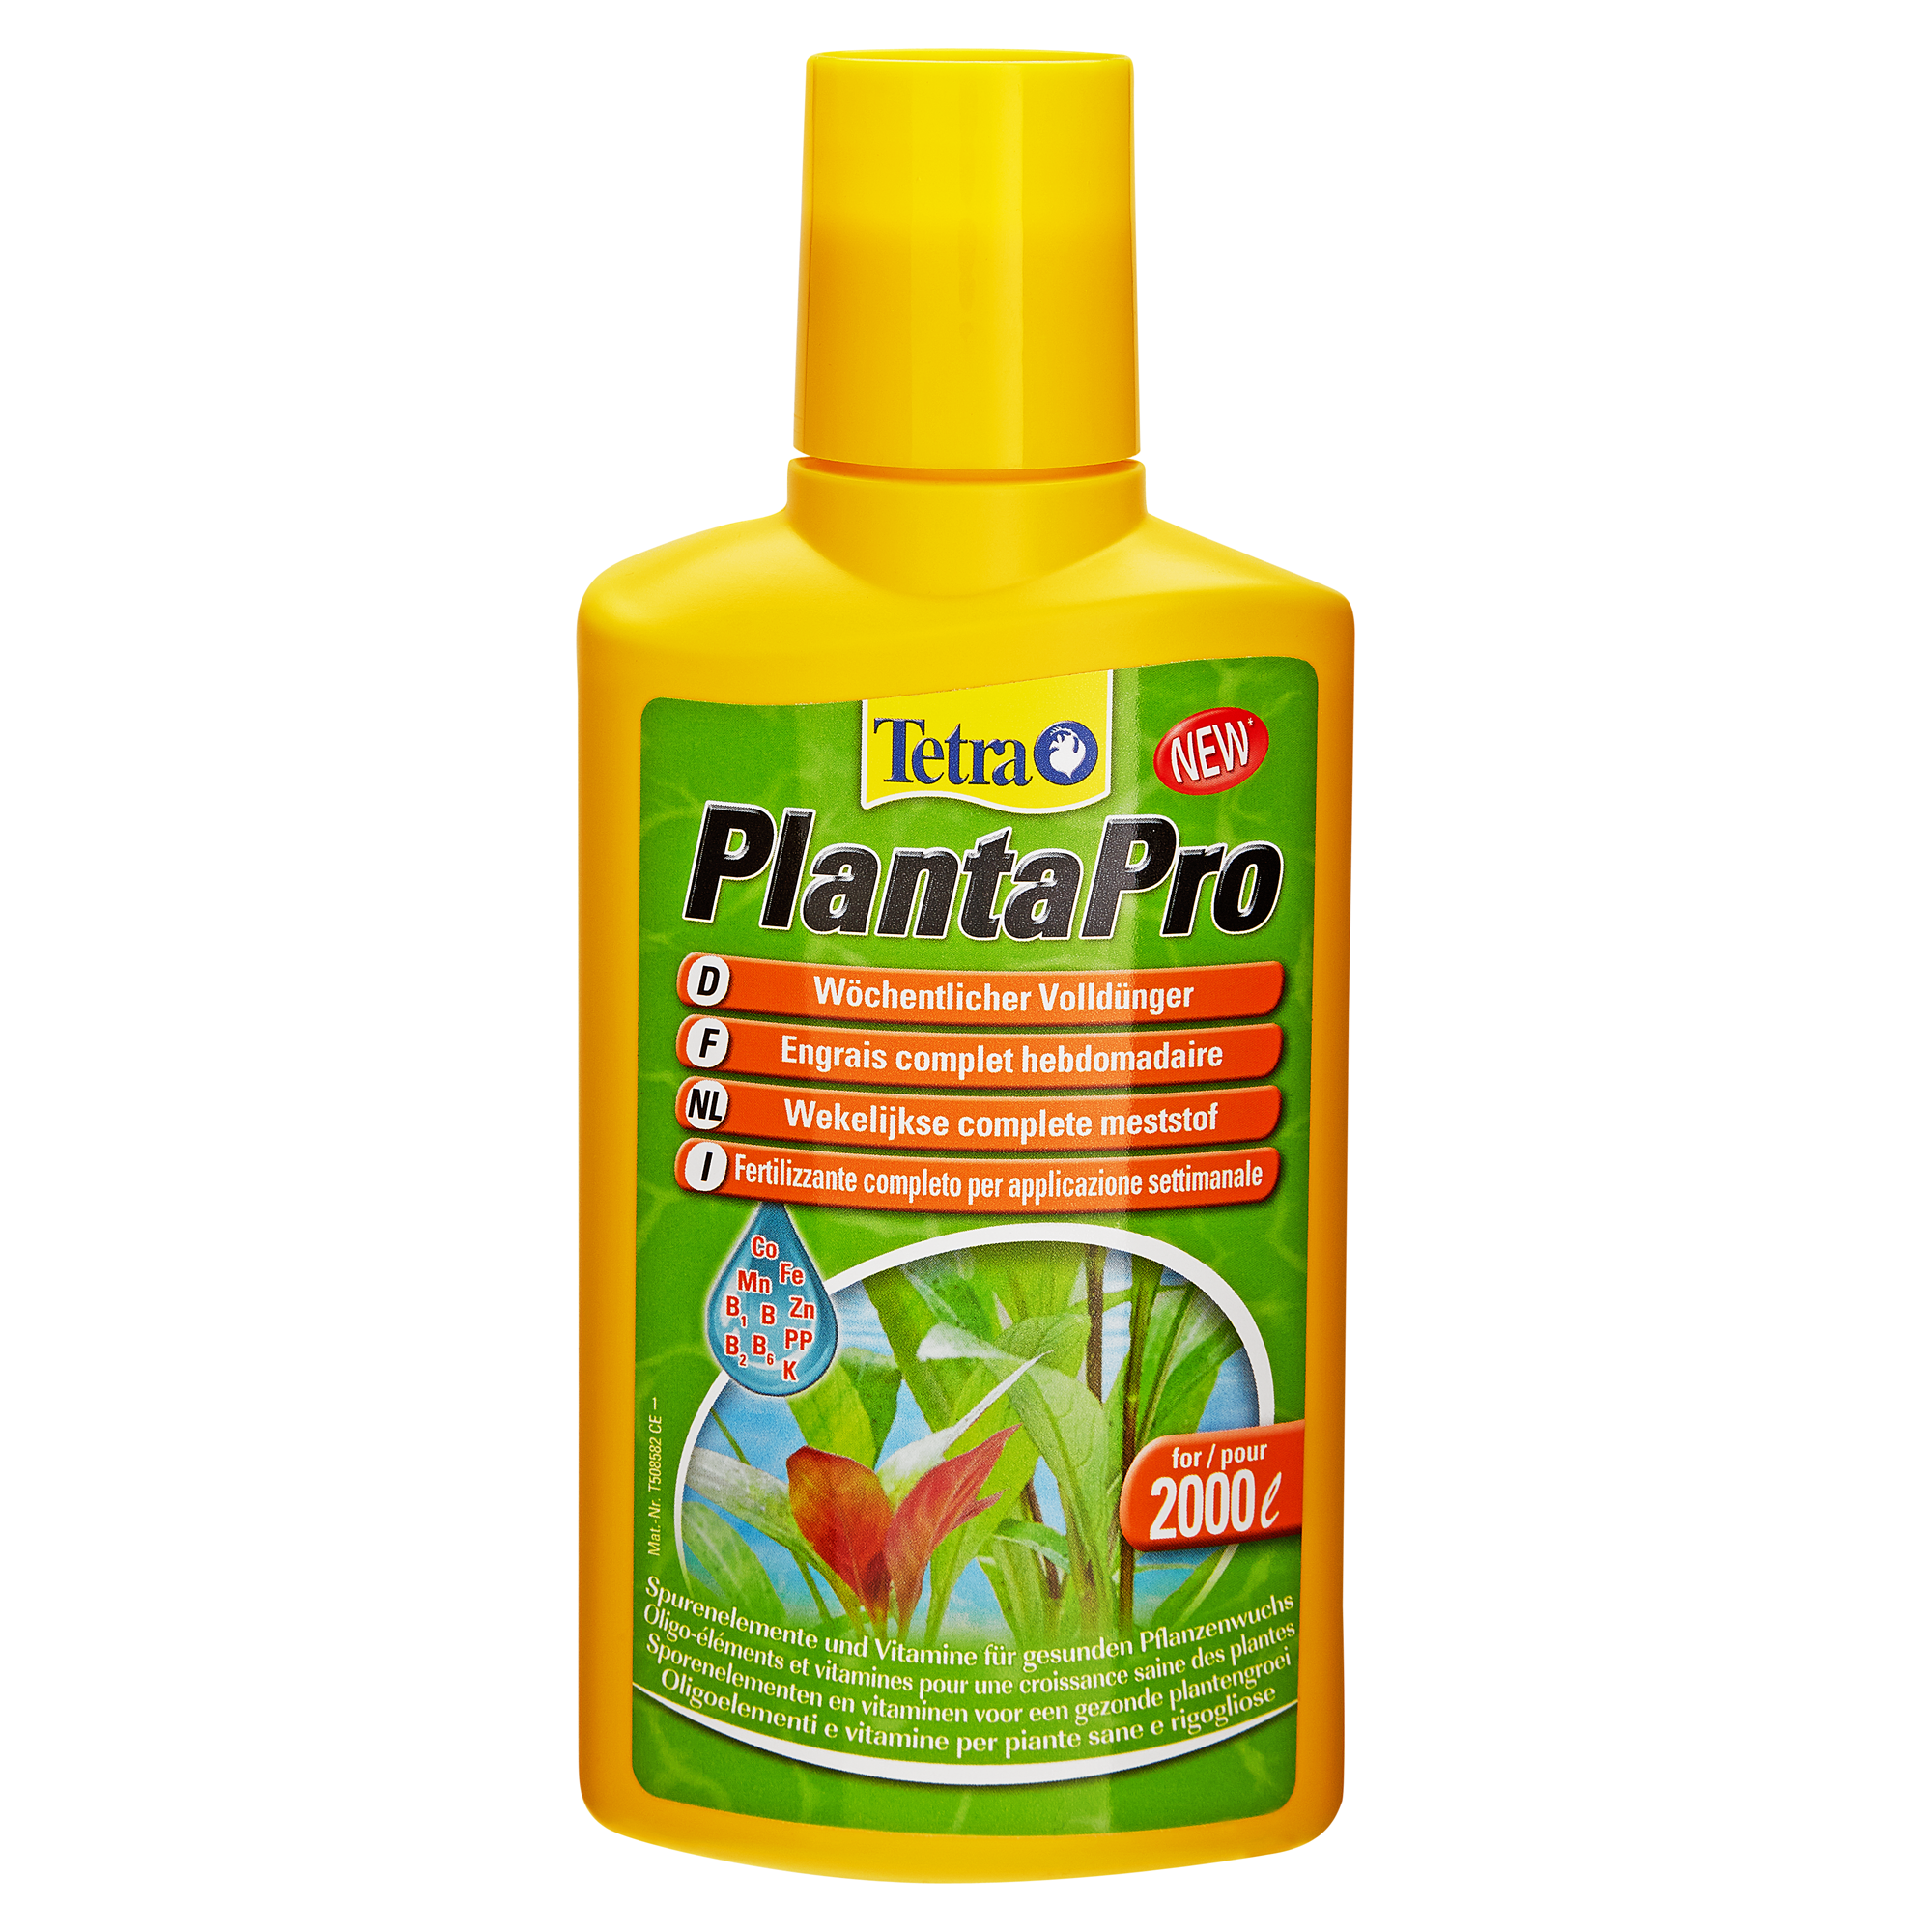 Volldünger "PlantaPro" 250 ml + product picture